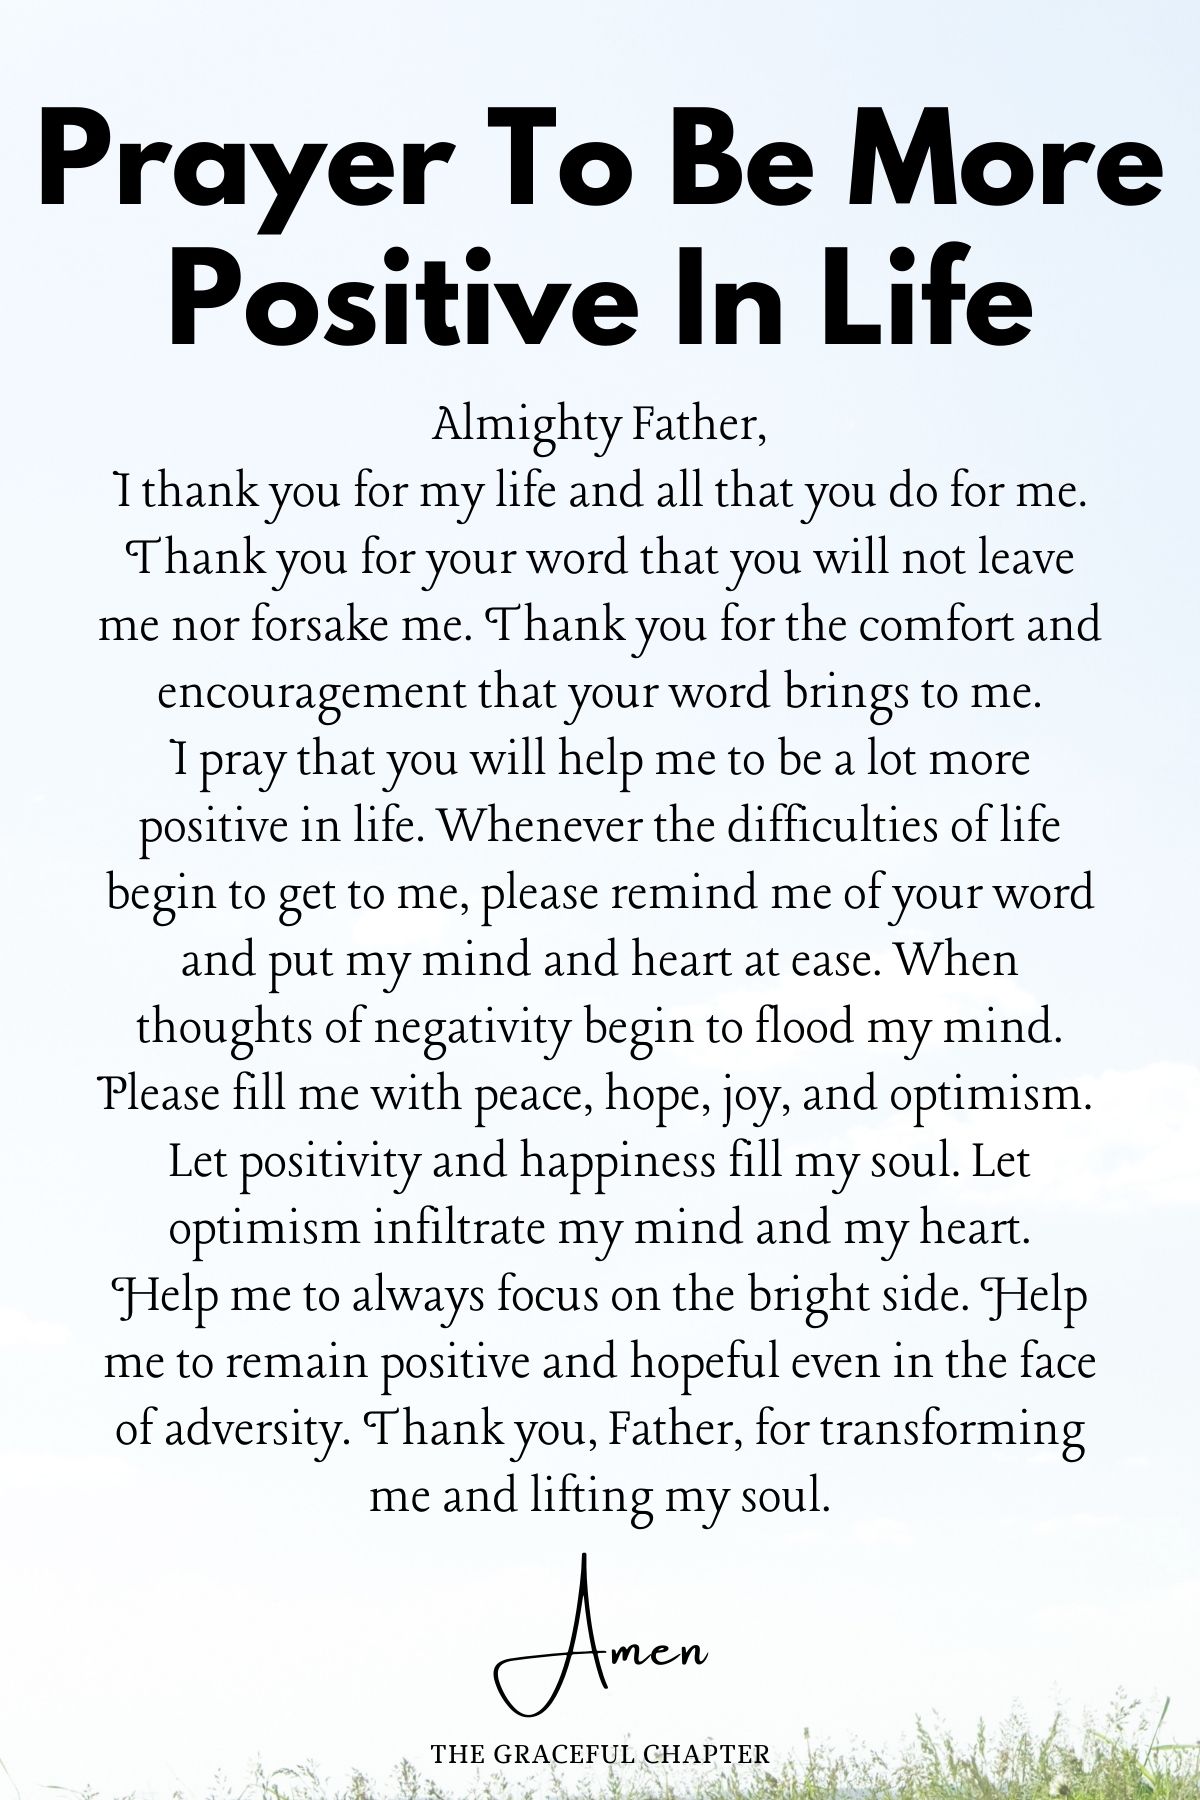 Prayer to be more positive in life